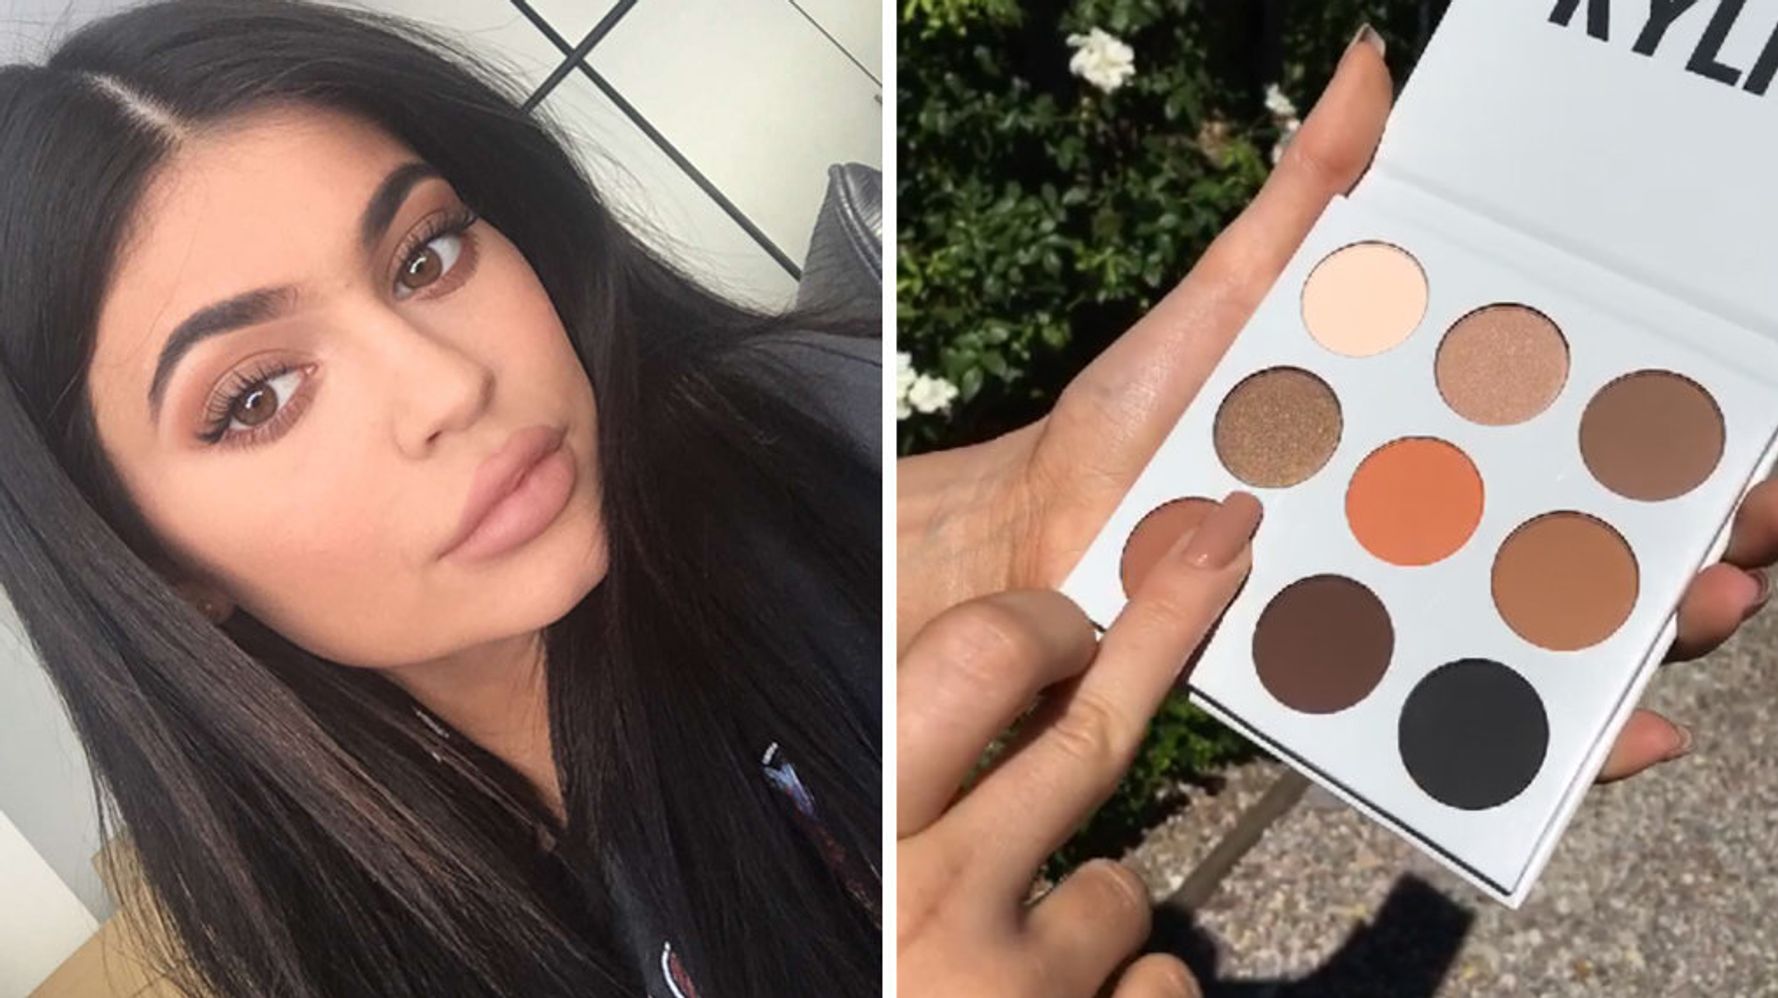 Know more about Kylie Bronze Palette Swatches